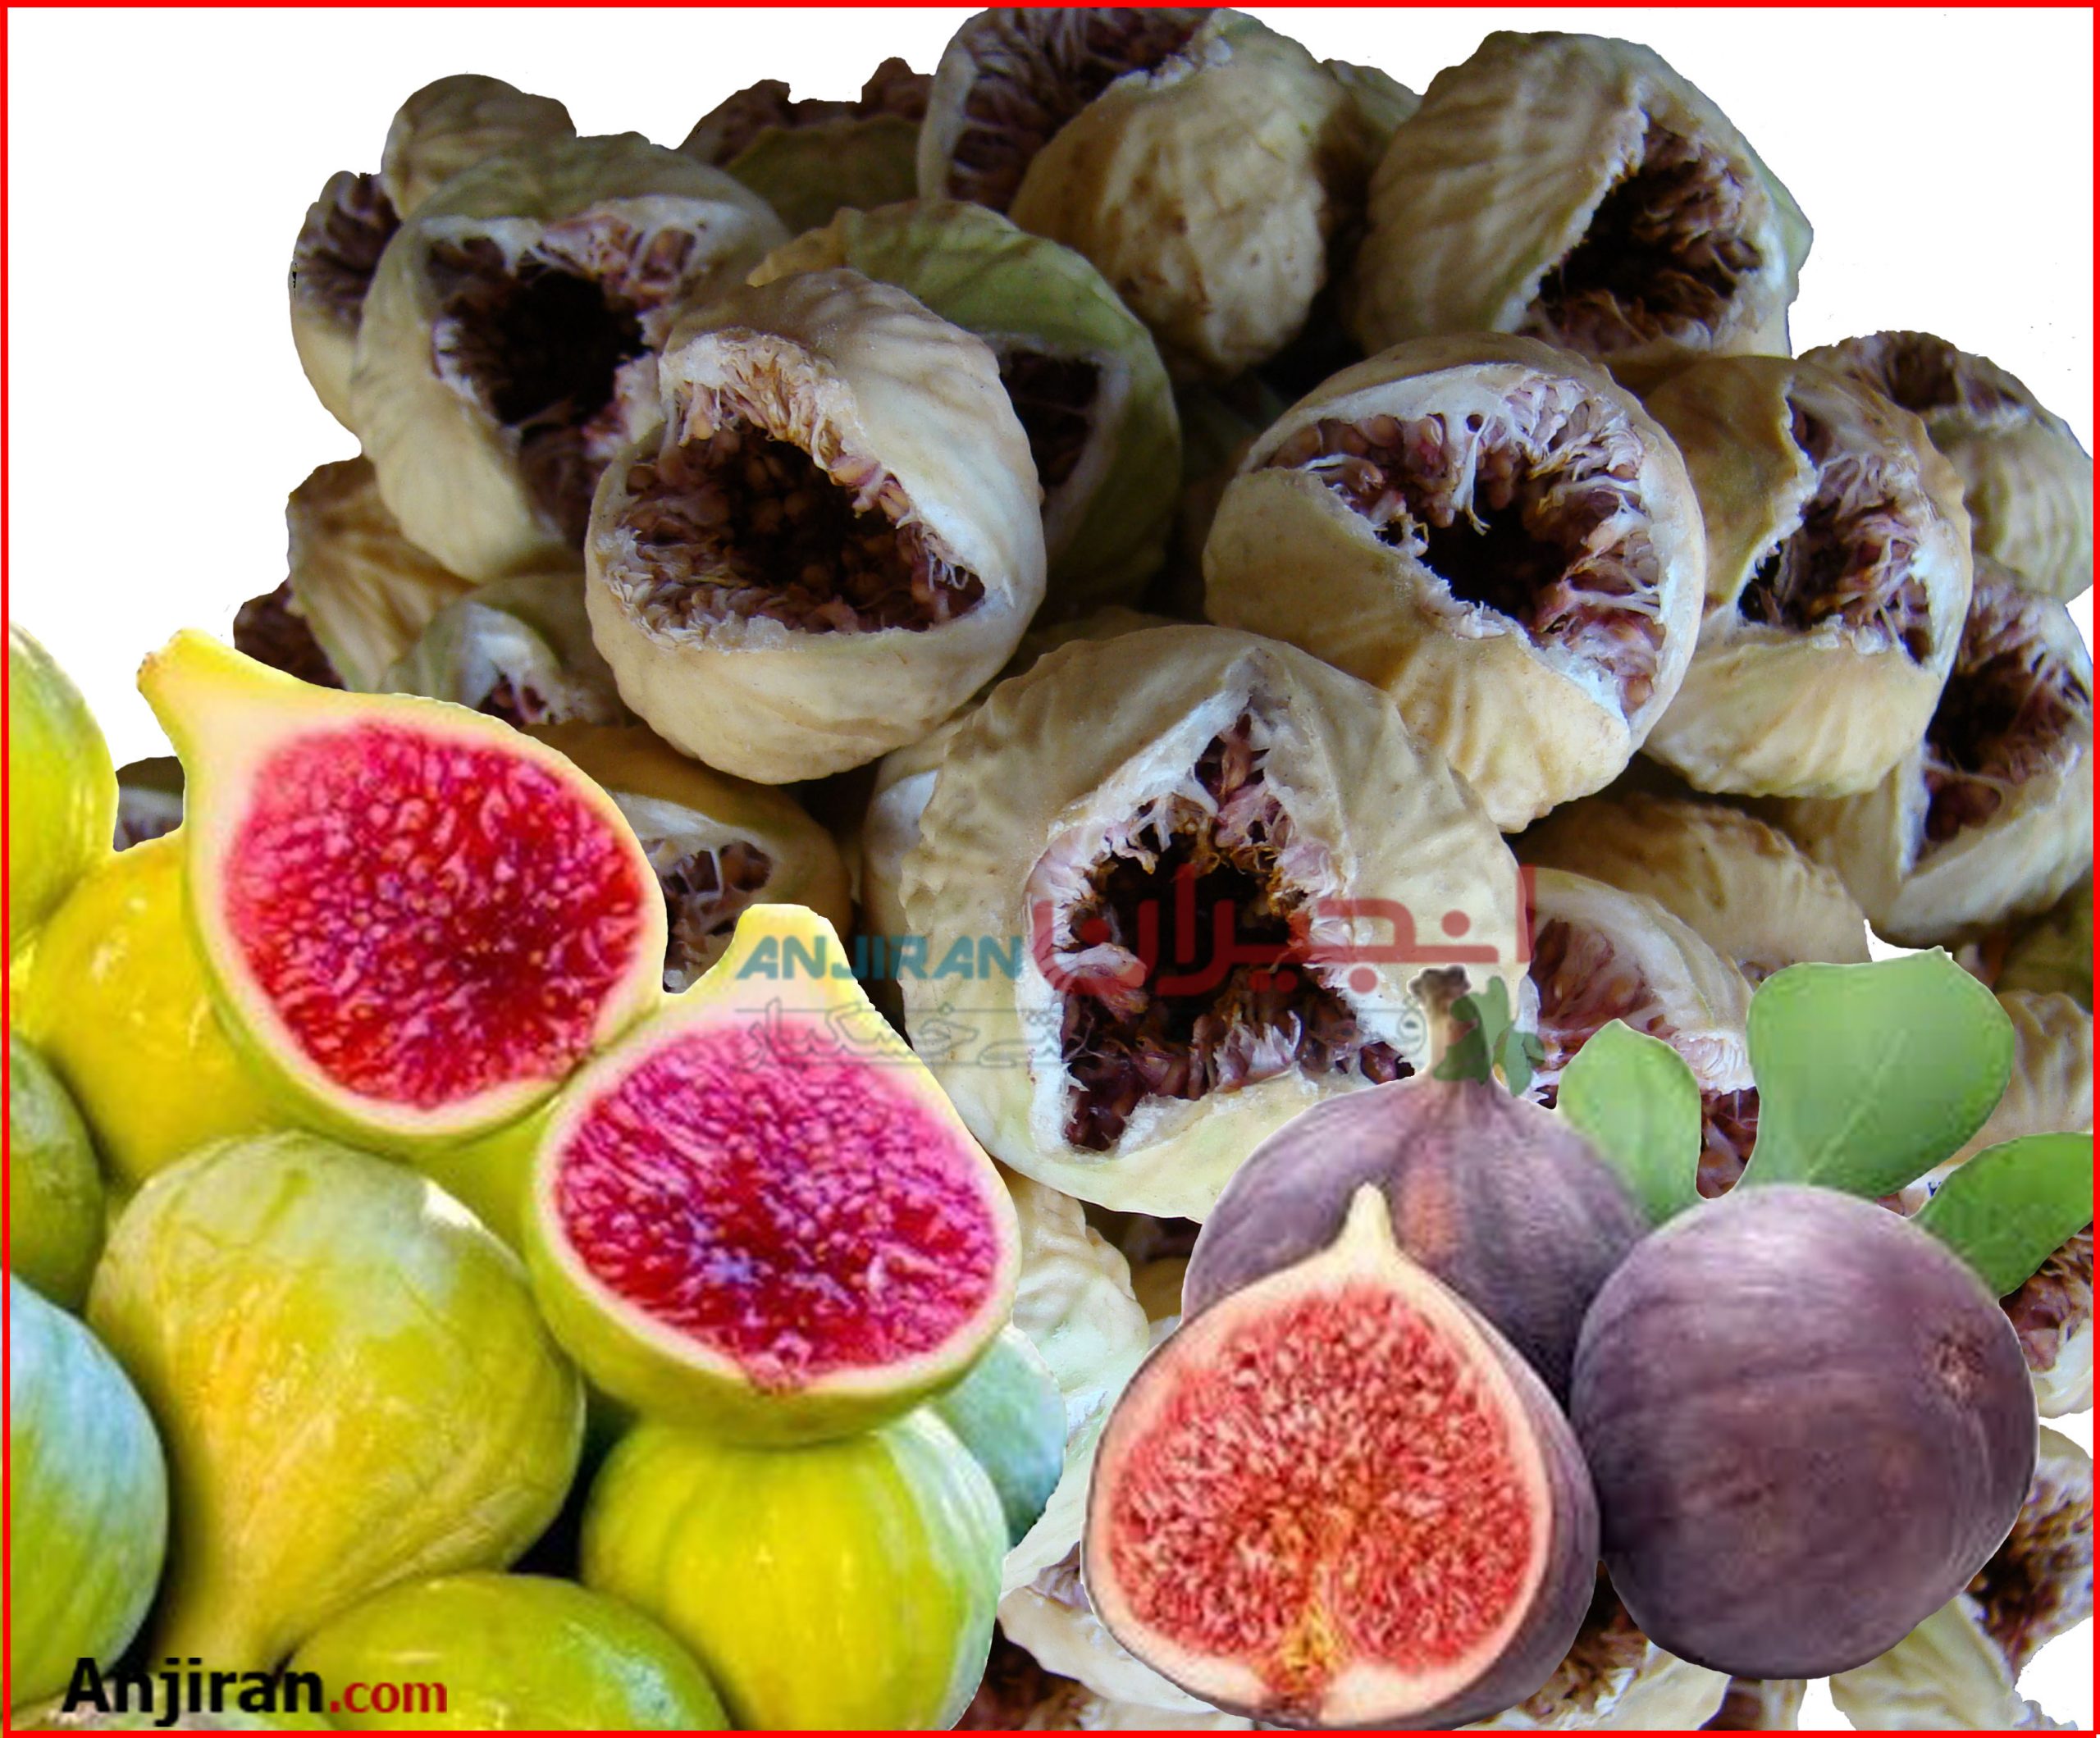 Fresh Figs or Dried Figs, Which one is Better